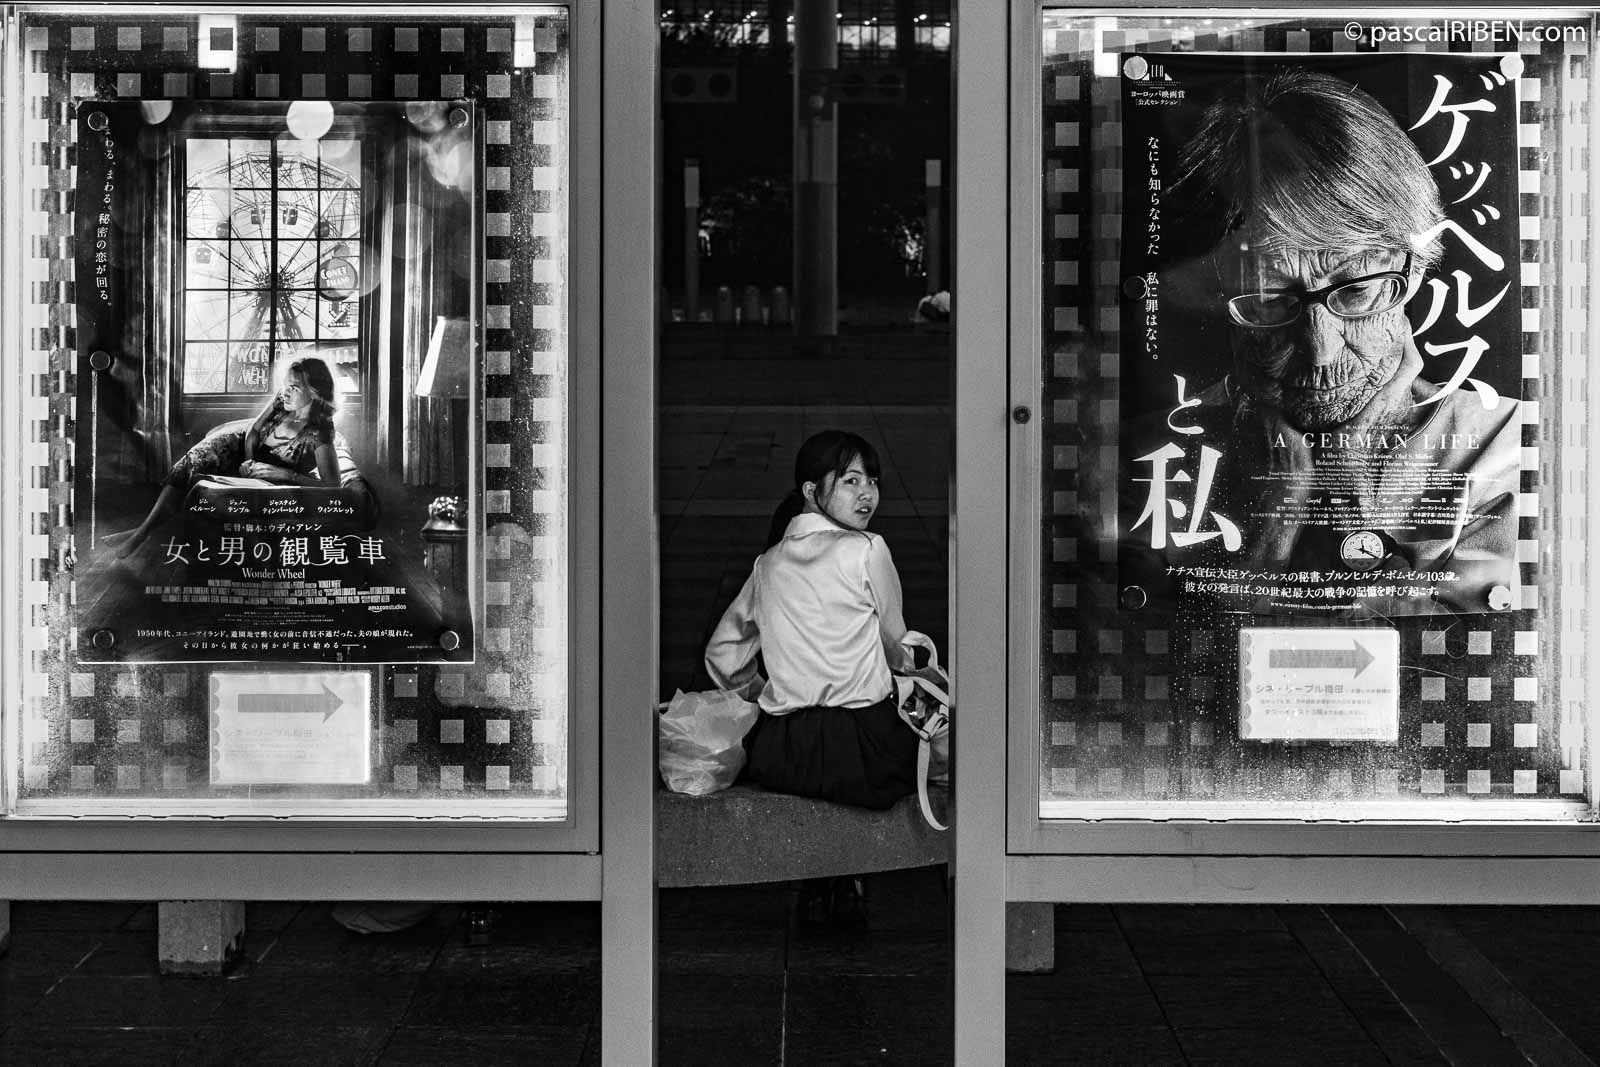 Two posters and a young Japanese woman from the cinema inside the Umeda Sky Builing: "A German Life" and on the left, Woody Allen's "Wonder Wheel" movie.